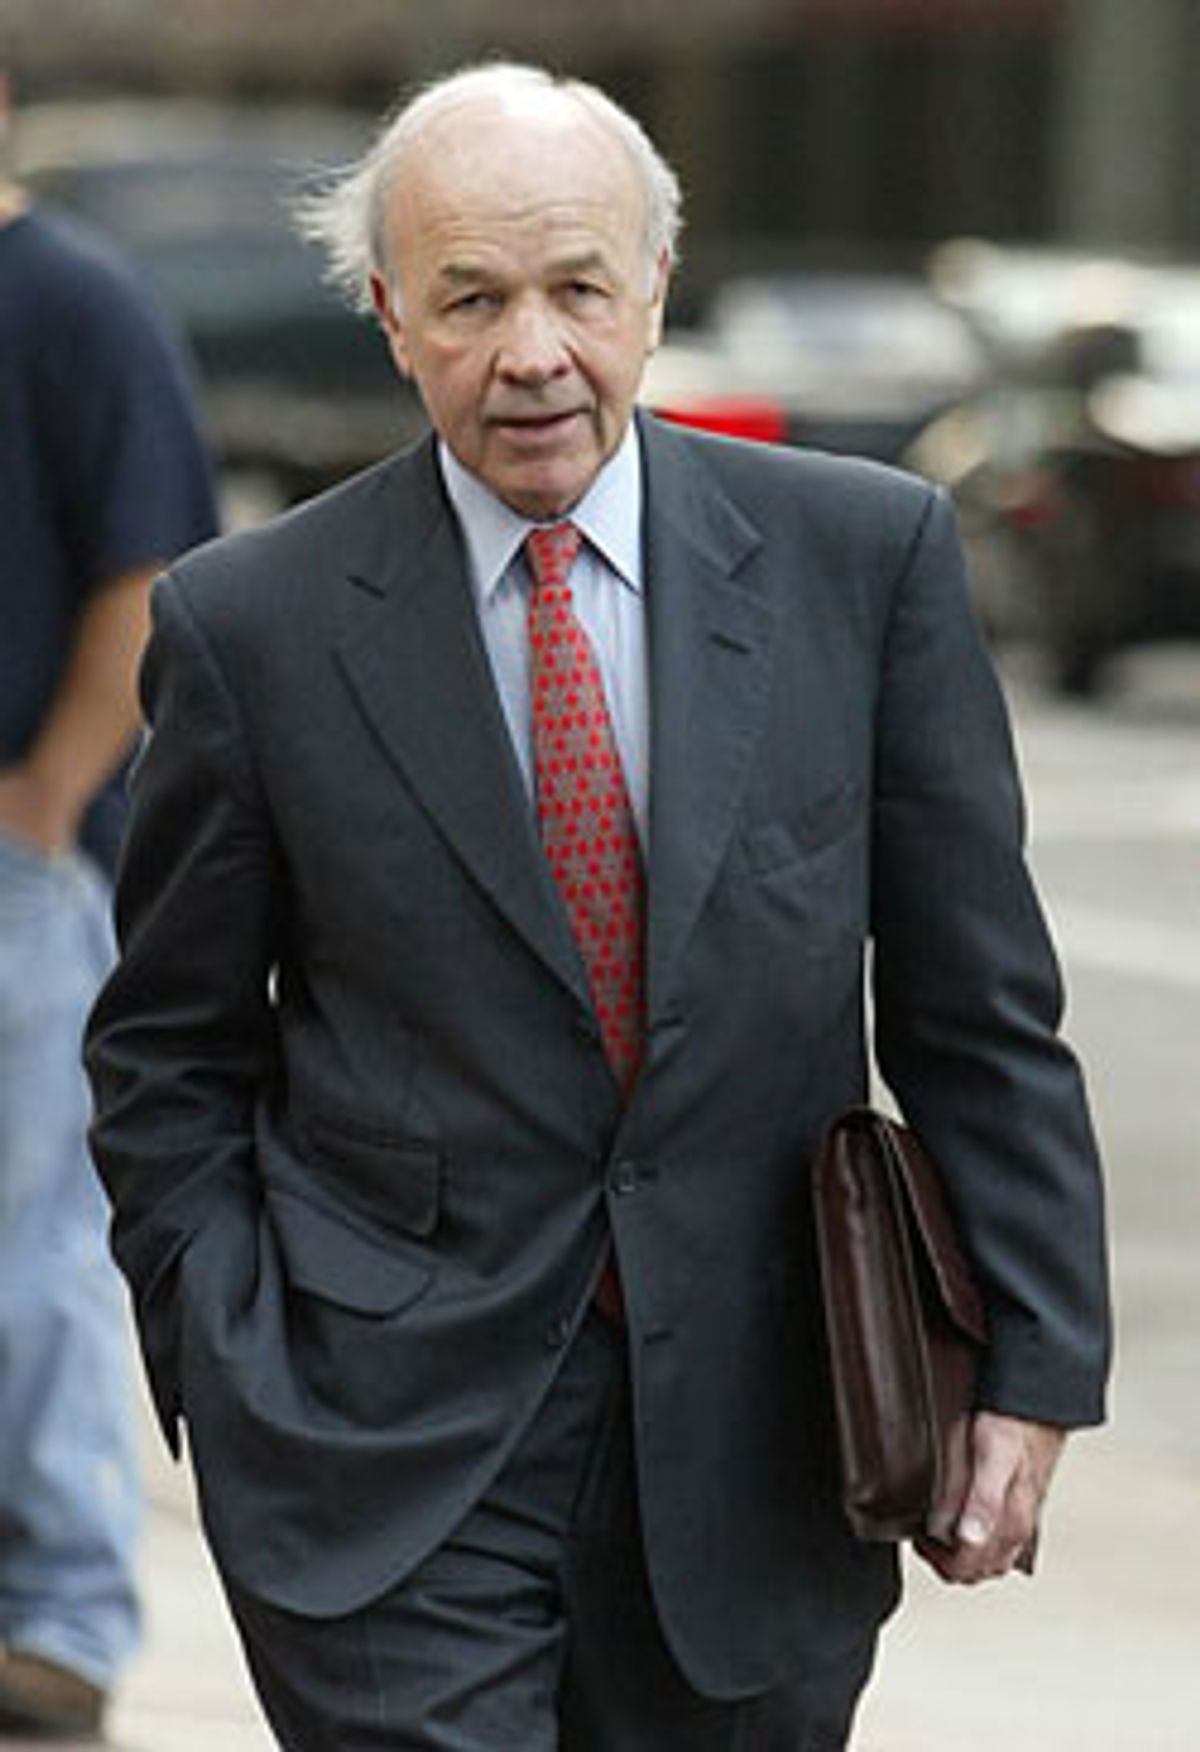 Jul 05, 2006; Houston, TX, USA; Former Enron Corporation President &amp; CEO KENNETH LAY, 64 died of an apparent massive coronary in Aspen Colorado on the 4th of July 2006. Lay was found guilty on 10 counts of fraud and conspiracy related to the collapse of Enron, the energy company he founded that eventually grew into the nation's seventh largest company before it imploded after an accounting scandal. Lay was scheduled for sentencing on Oct. 23, 2006. FILE PHOTO: Apr 6, 2006; Enron former chief executive Jeffrey Skilling and founder KENNETH LAY were found guilty Thursday of conspiracy and fraud. Skilling was found guilty on 20 counts of conspiracy, fraud, false statements and insider trading. He was found not guilty on eight counts of insider trading. Lay was found guilty on all six counts of conspiracy and fraud. Pictured: Former Enron CEO KENNETH LAY arrives at the Bob Casey Federal Court House for day 36 in the Enron trial 6 April 2006 in Houston, Texas. Mandatory Credit: Photo by James Nielsen/ZUMA Press. (Â¬Â©) Copyright 2006 by James Nielsen (James Nielsen)